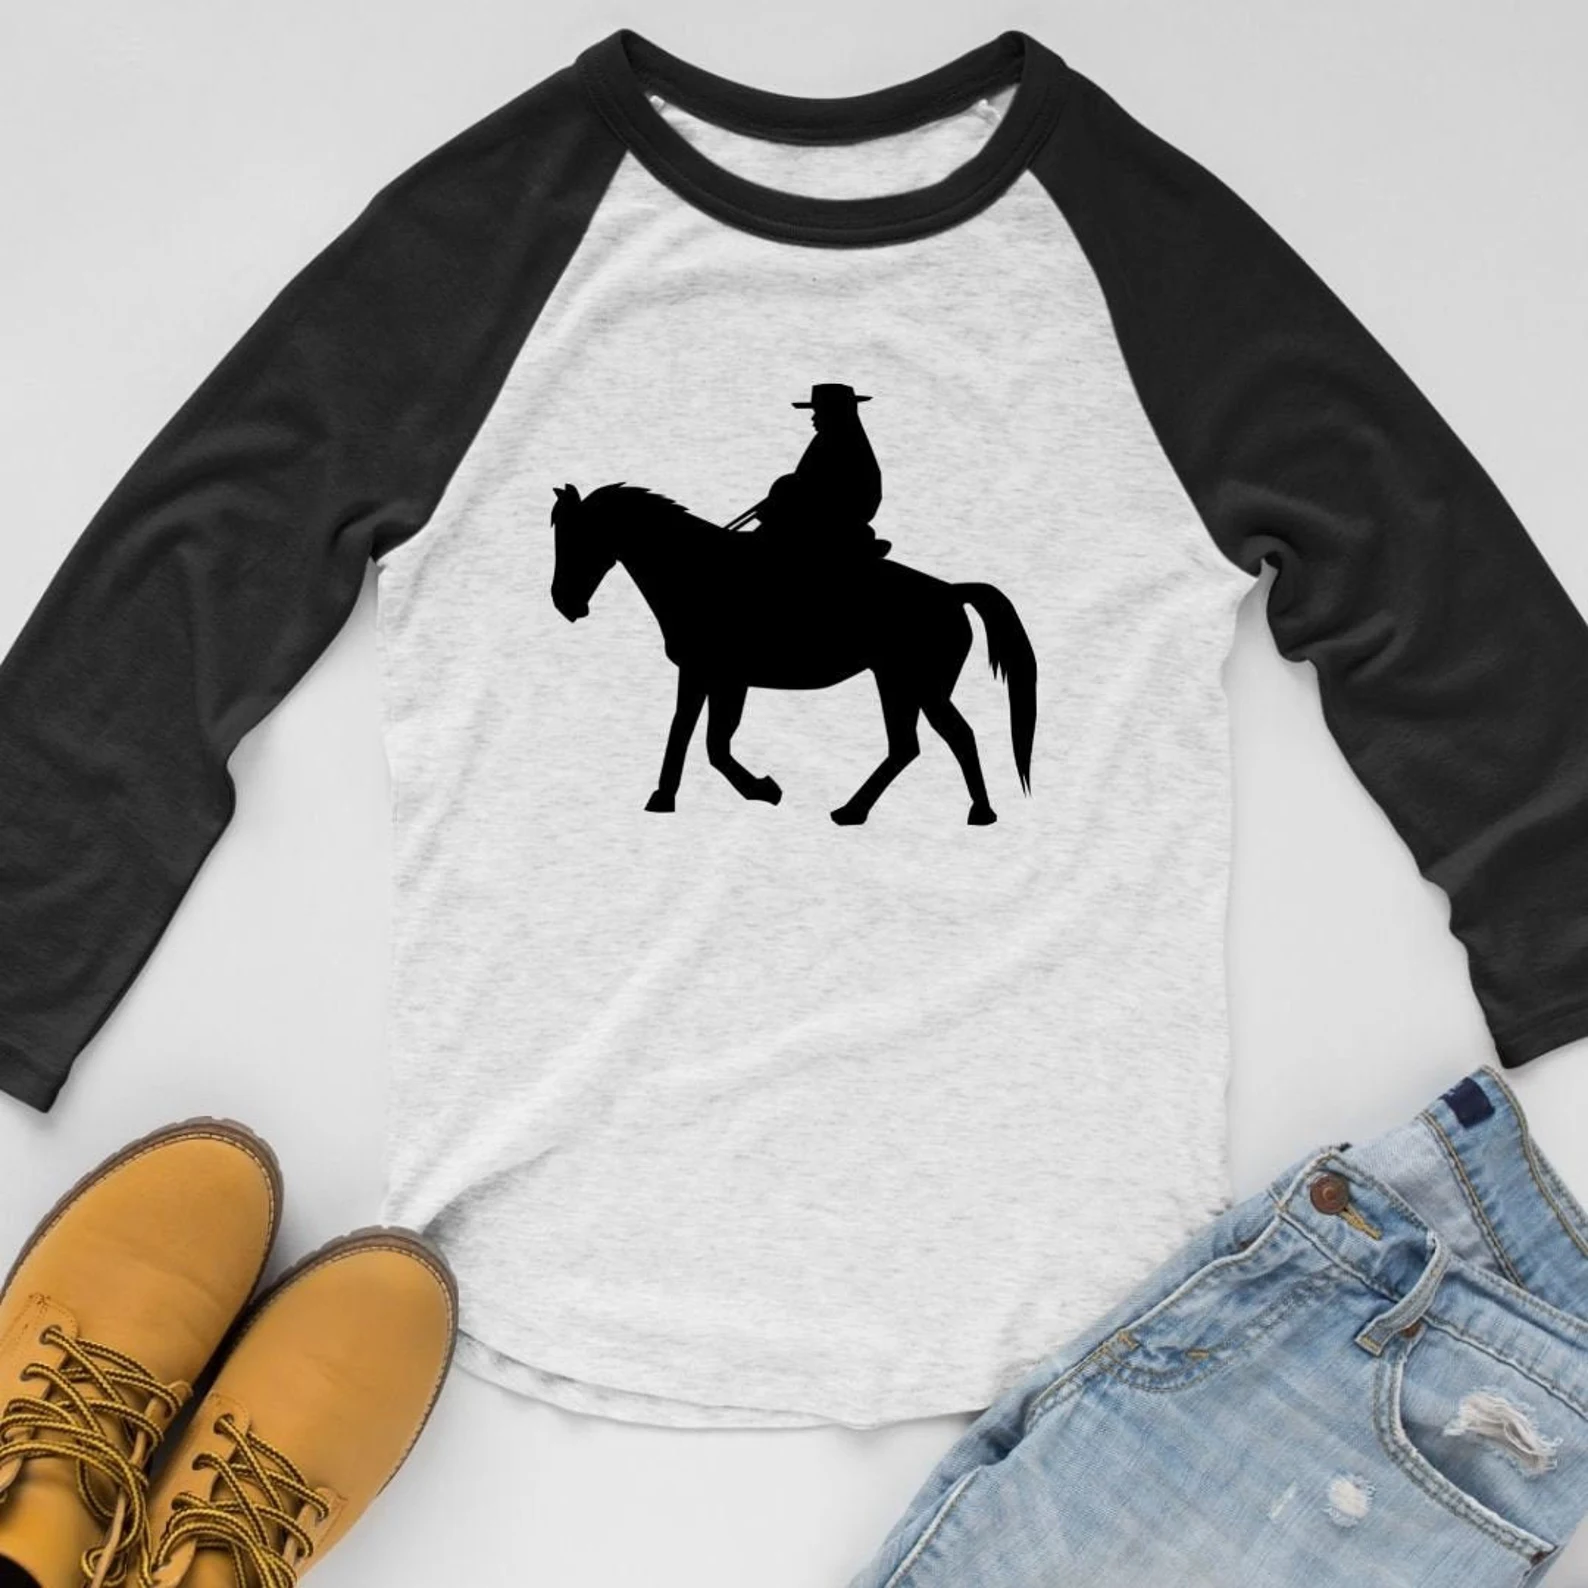 White and black sweater with a cowboy.